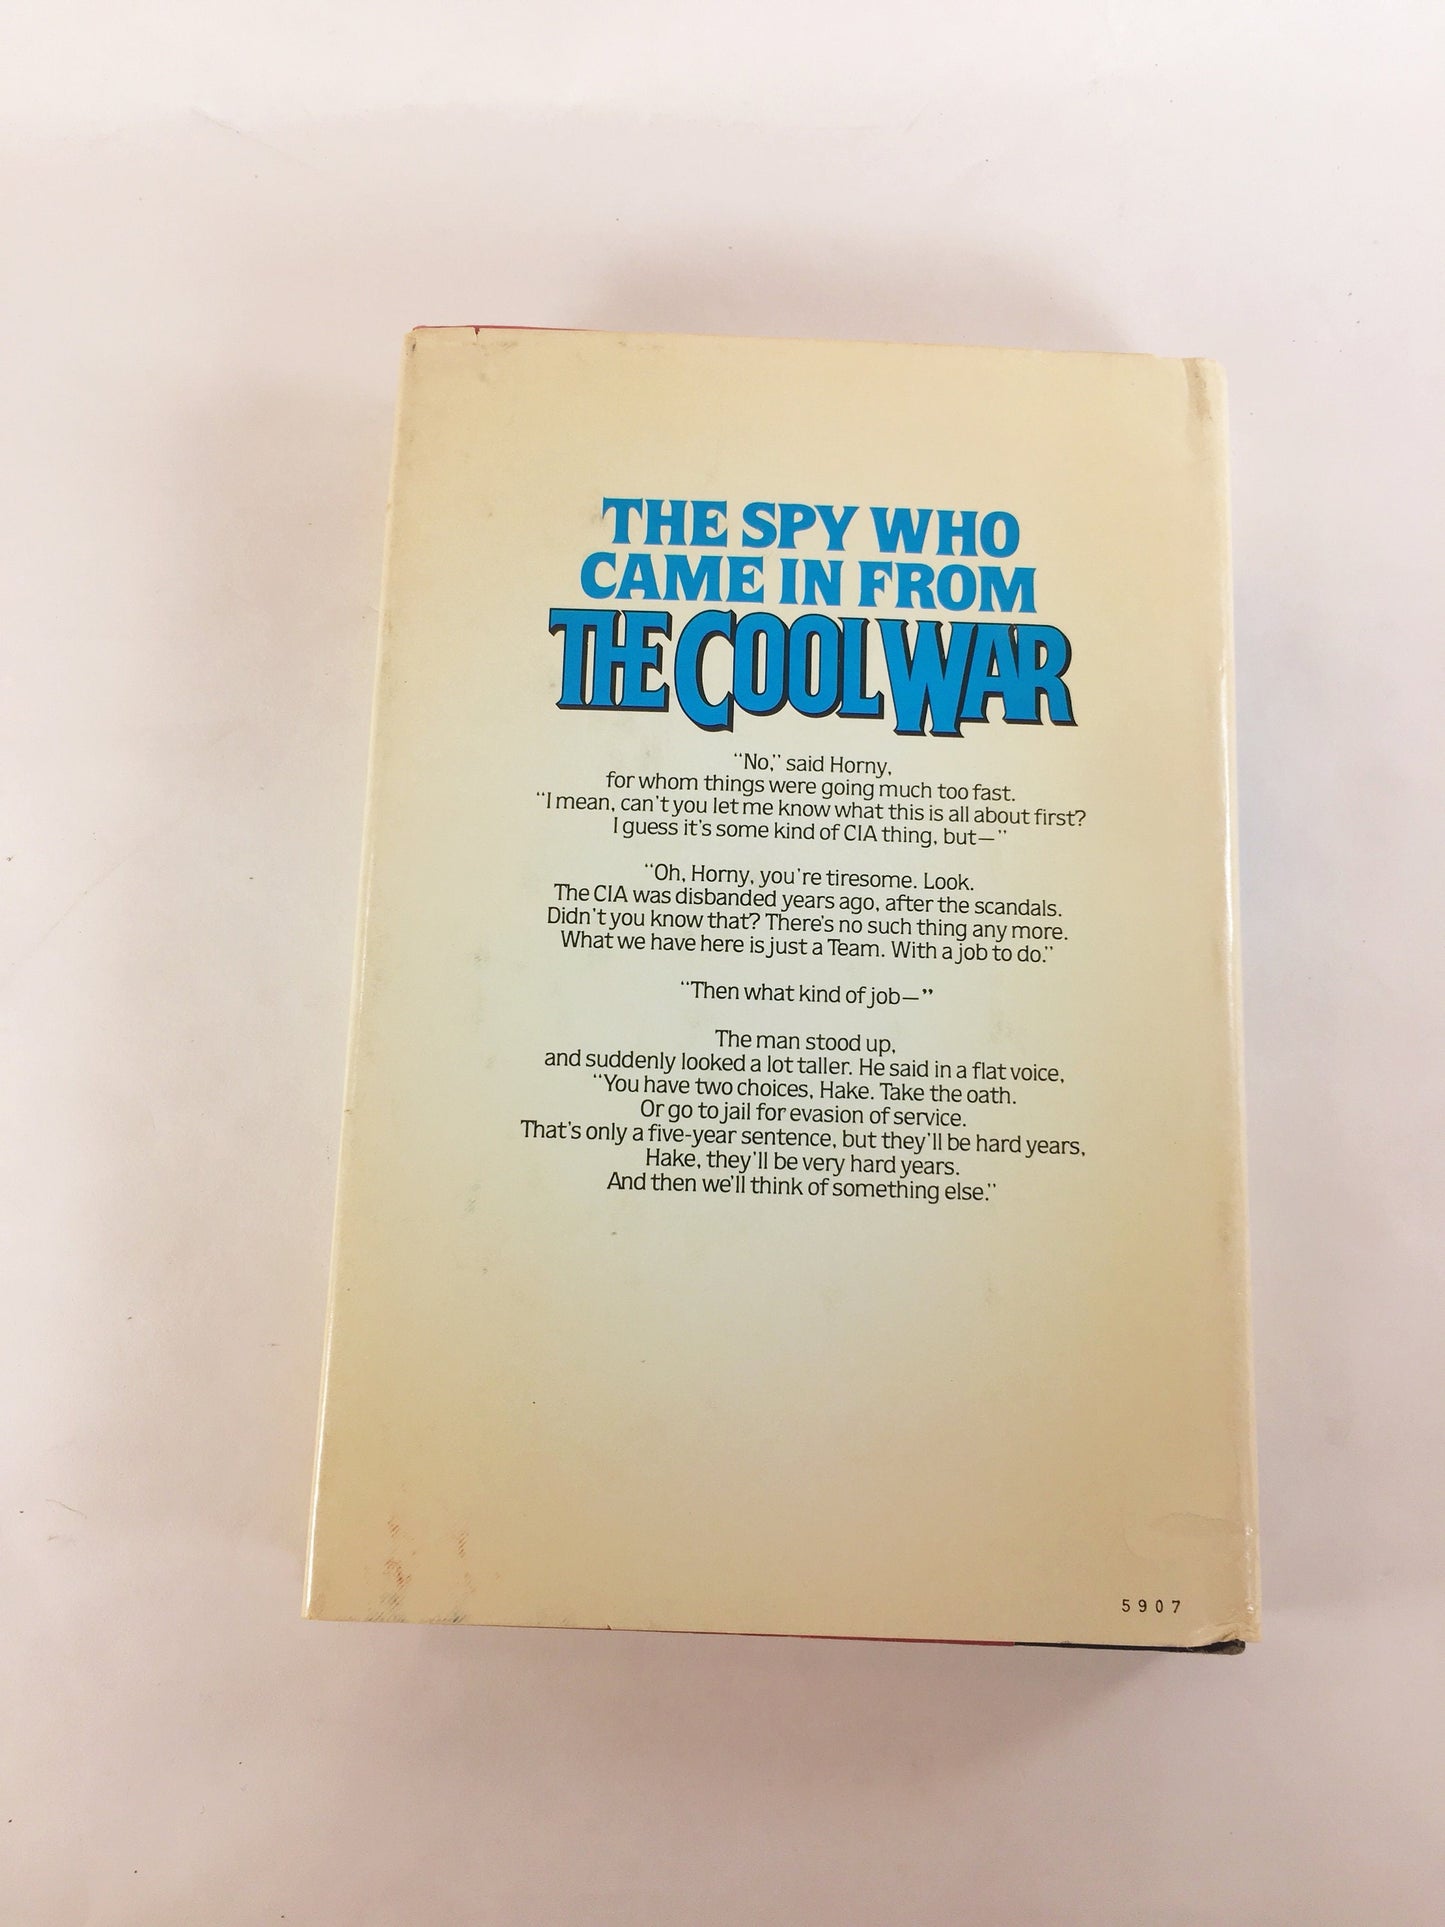 Cool War by Frederik Pohl circa 1981. Vintage science fiction book about spies between rival nations. Gripping story of intrigue & suspense